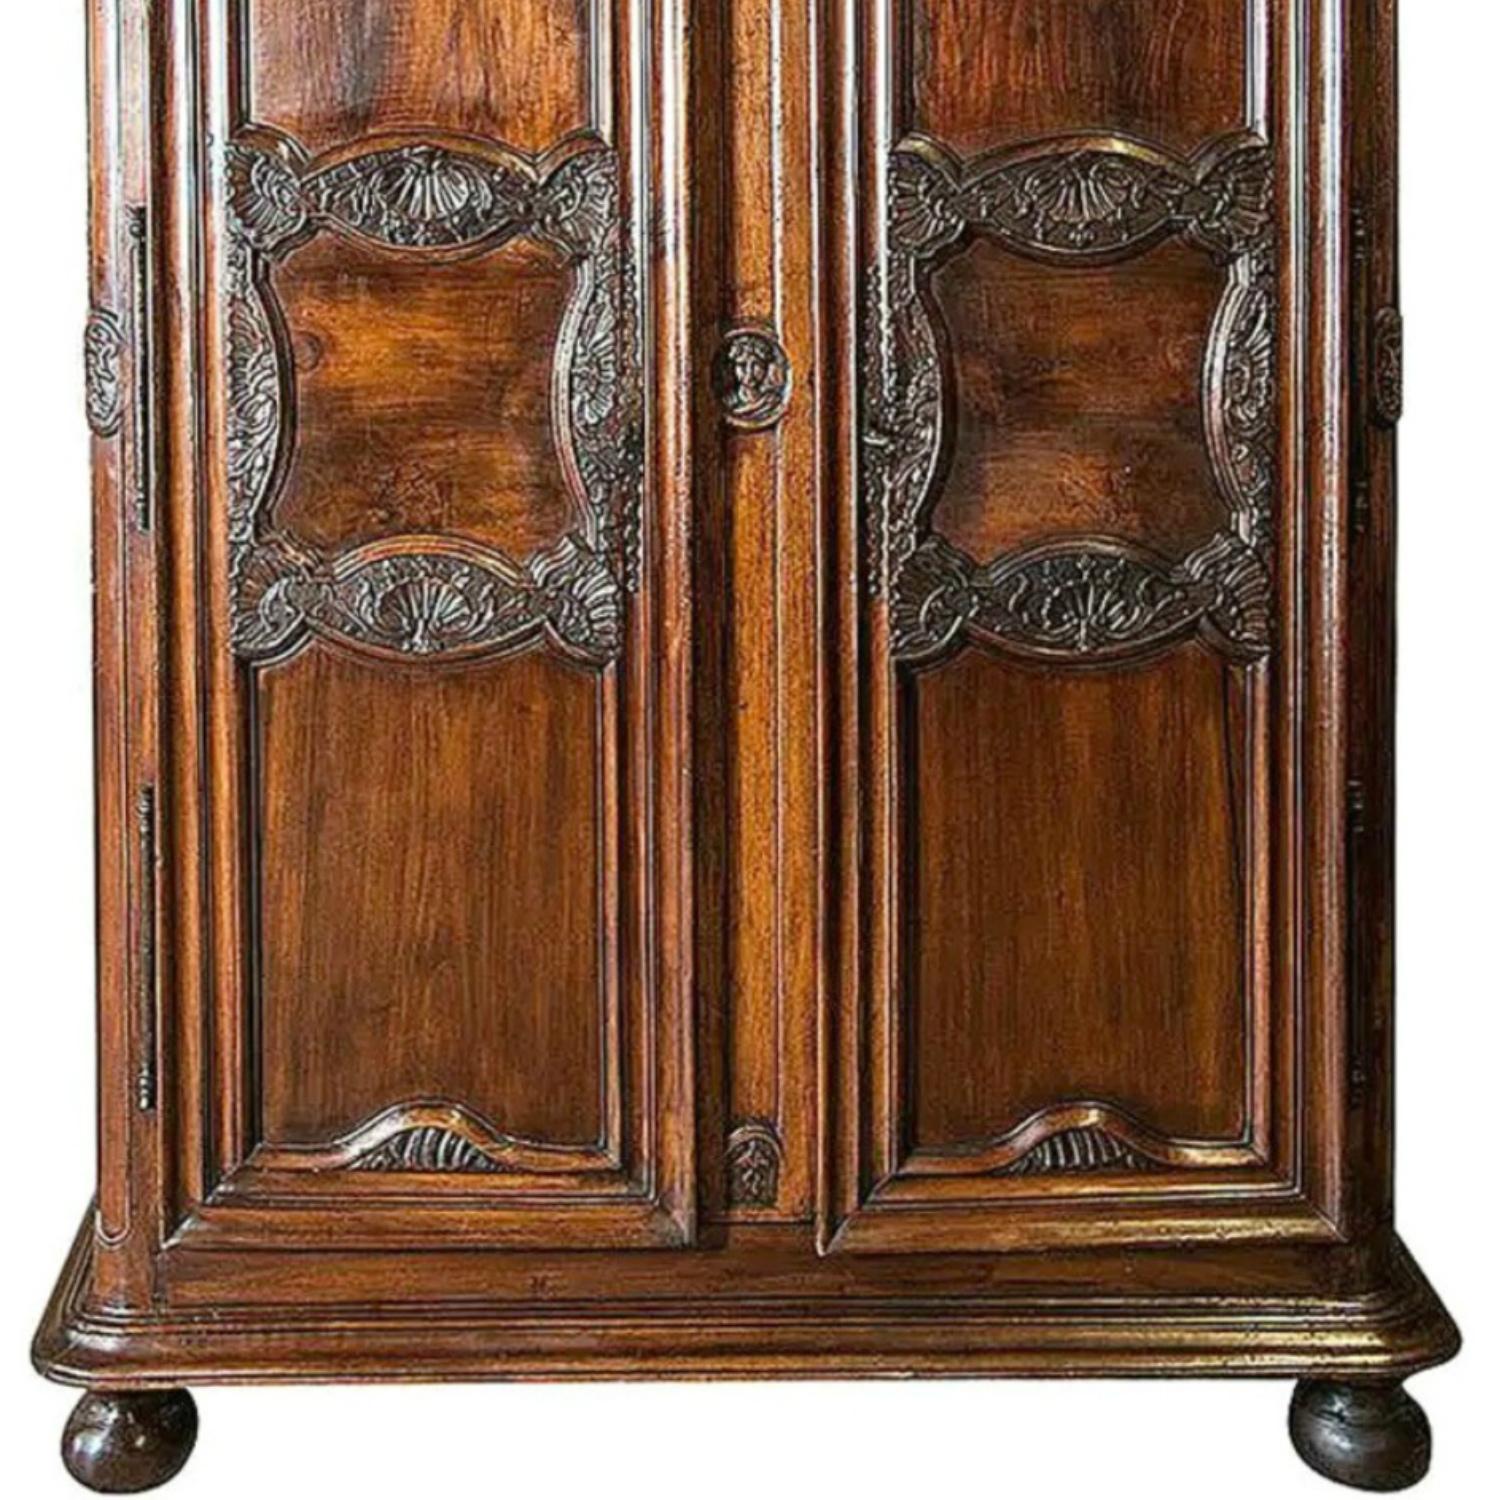 Exceptional 18th Century French Régence Period Walnut Chateau Lyonnaise Armoire For Sale 2